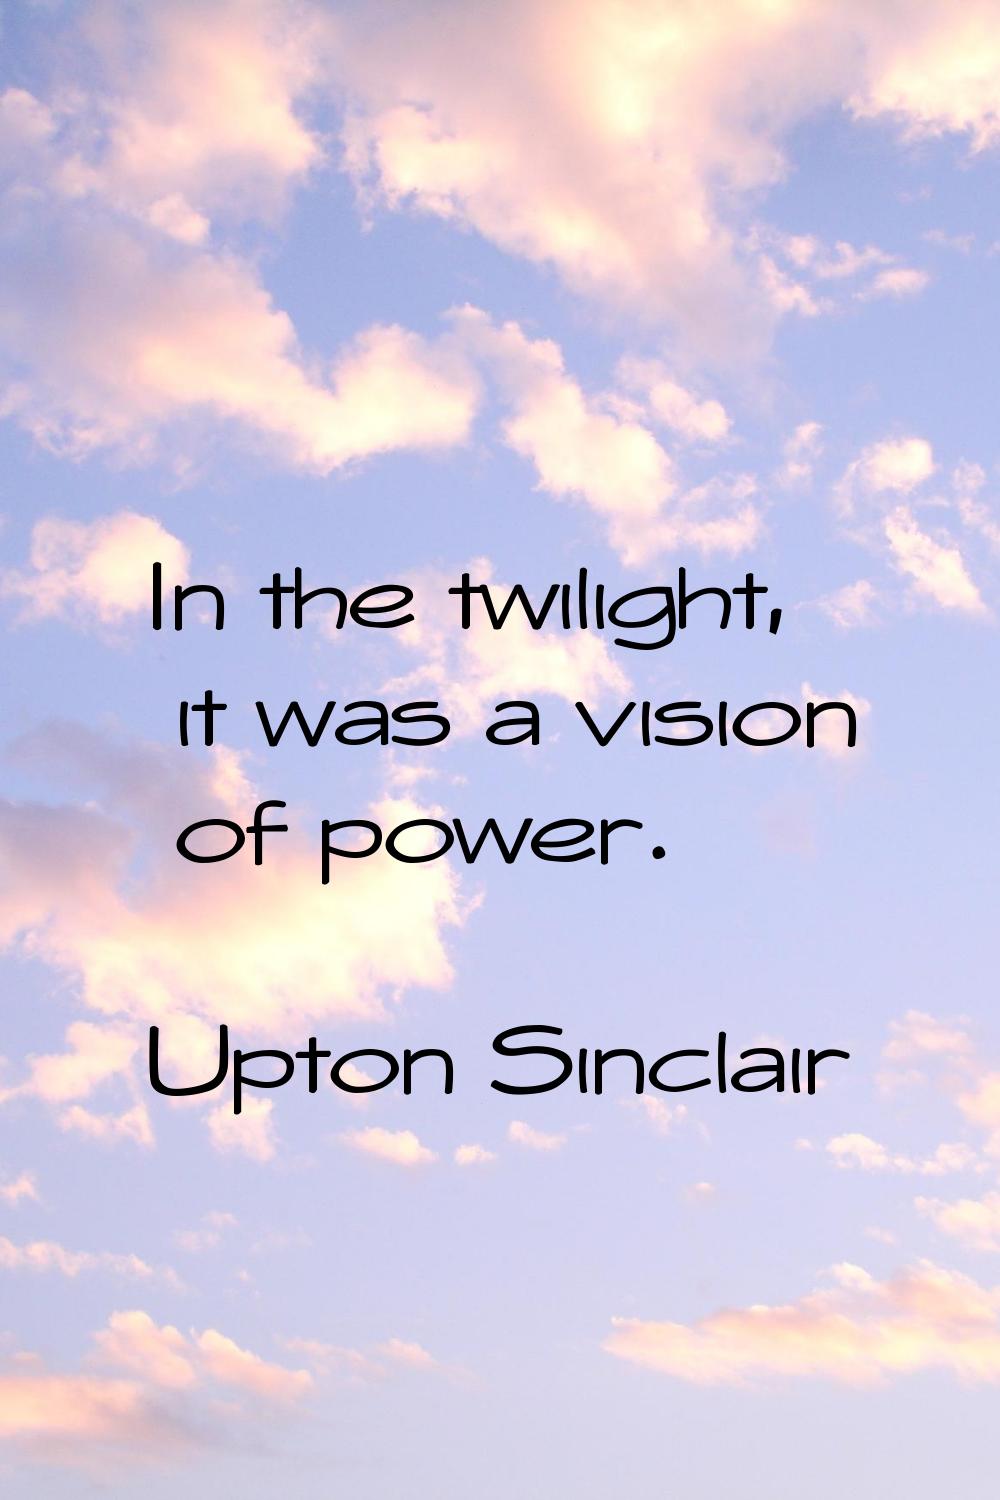 In the twilight, it was a vision of power.